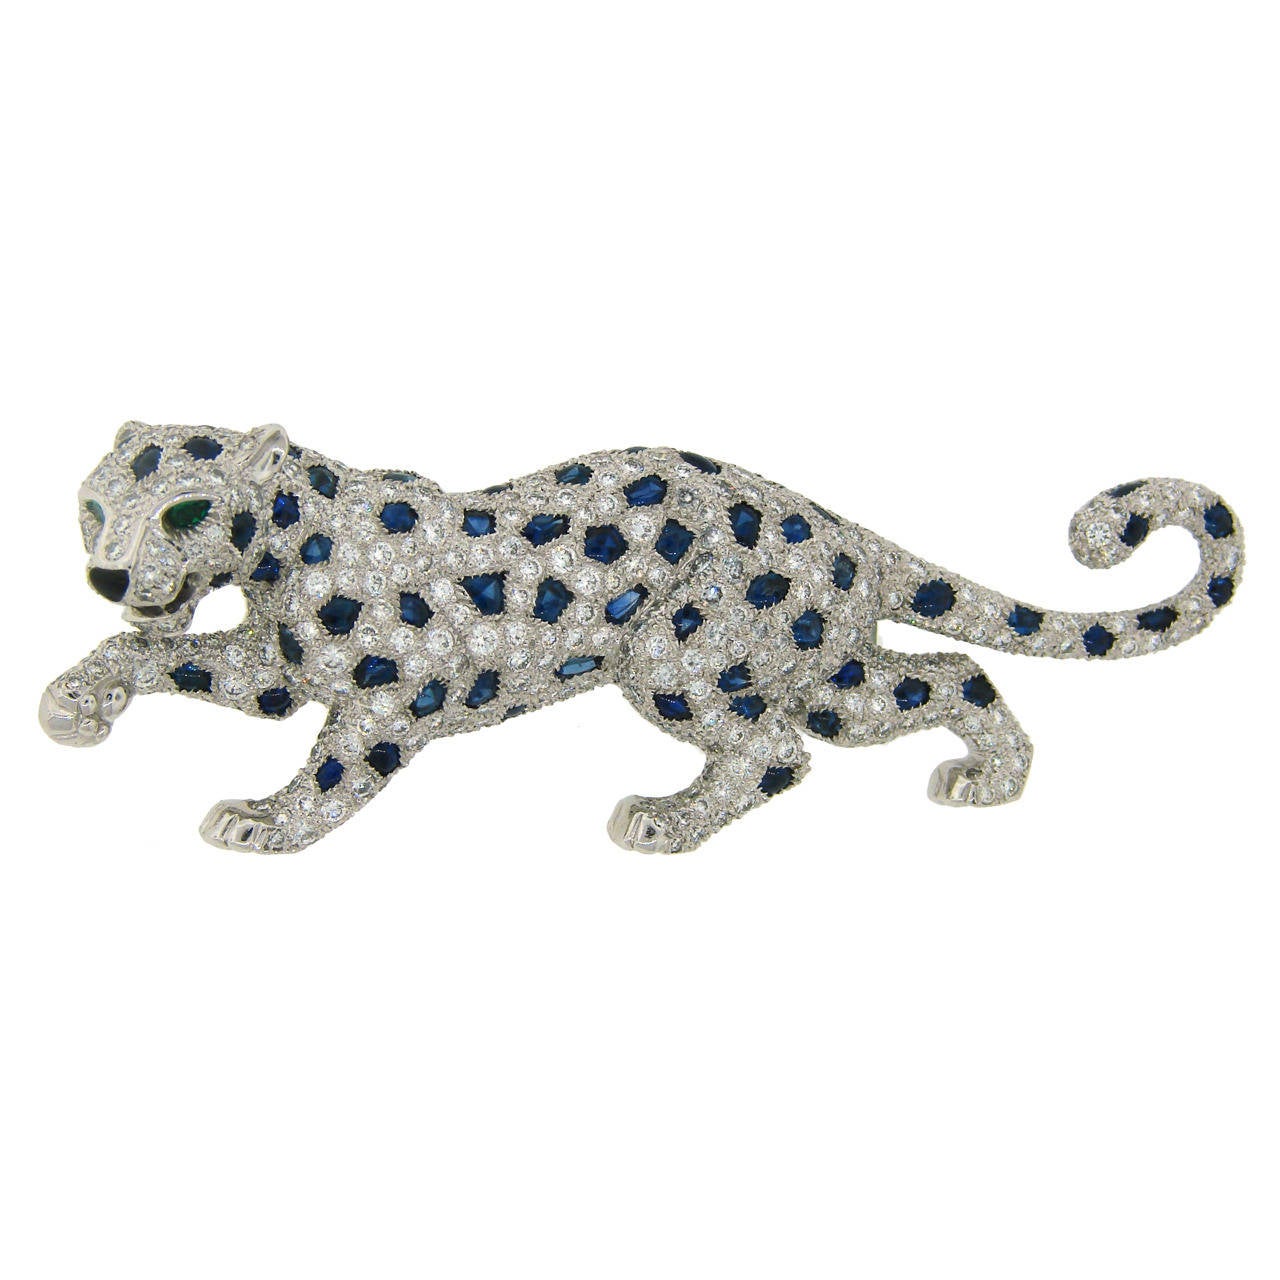 Signature Cartier Panthere brooch. 
Made of platinum and set with round brilliant cut diamonds and sapphires. The panther eyes are accented with emeralds. 
The pin is 2-3/4